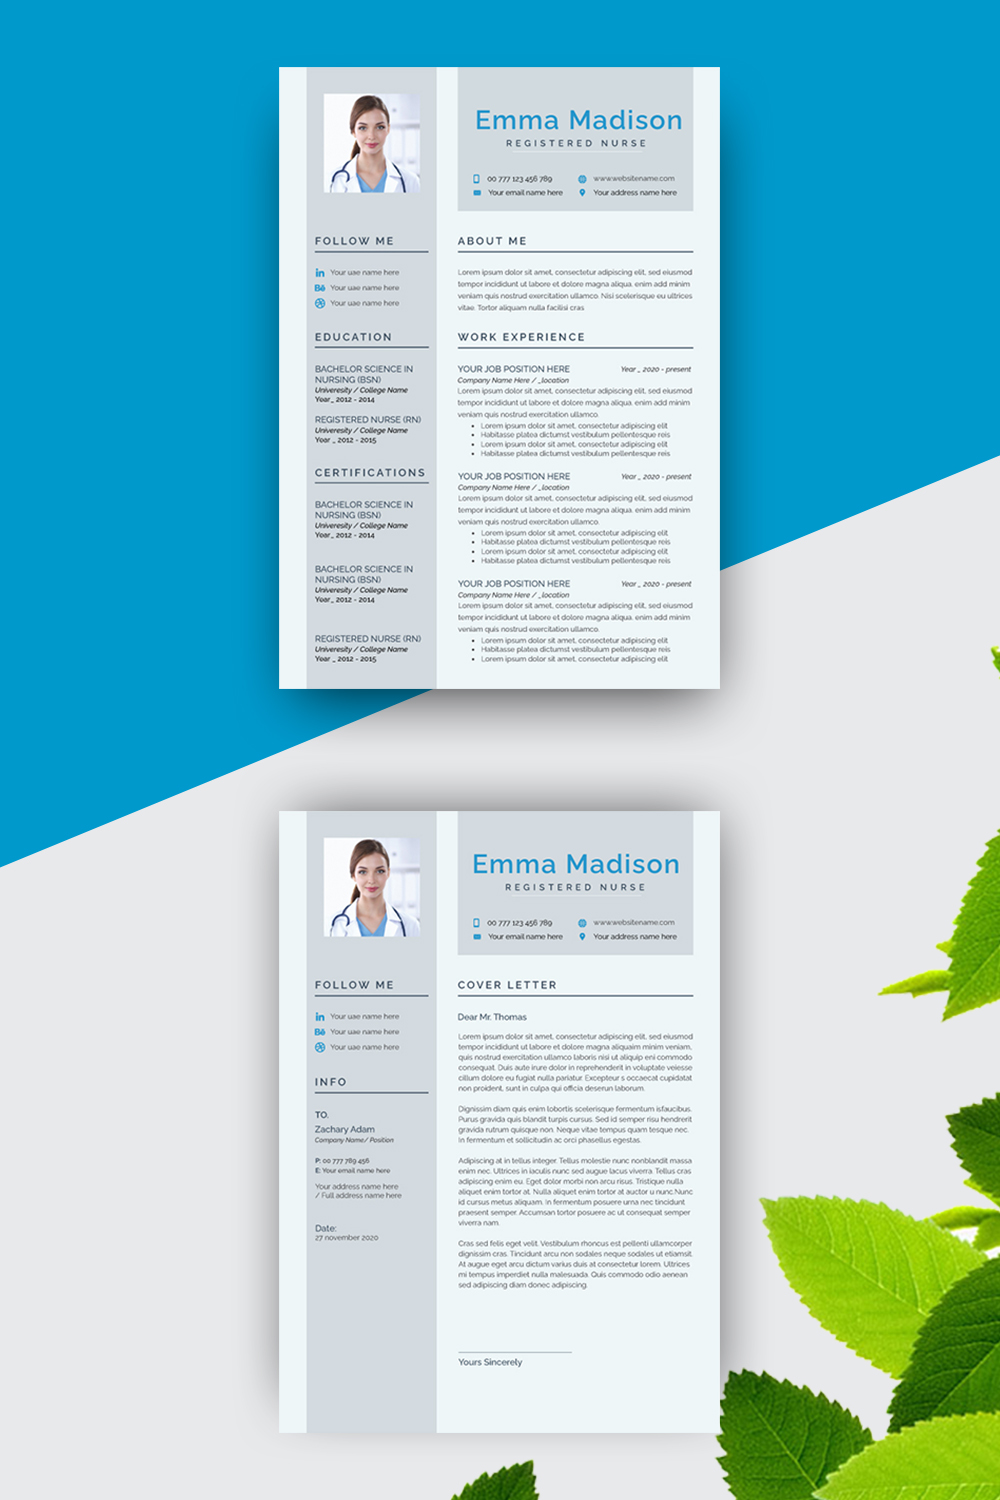 Two pages of a resume on a blue and white background.